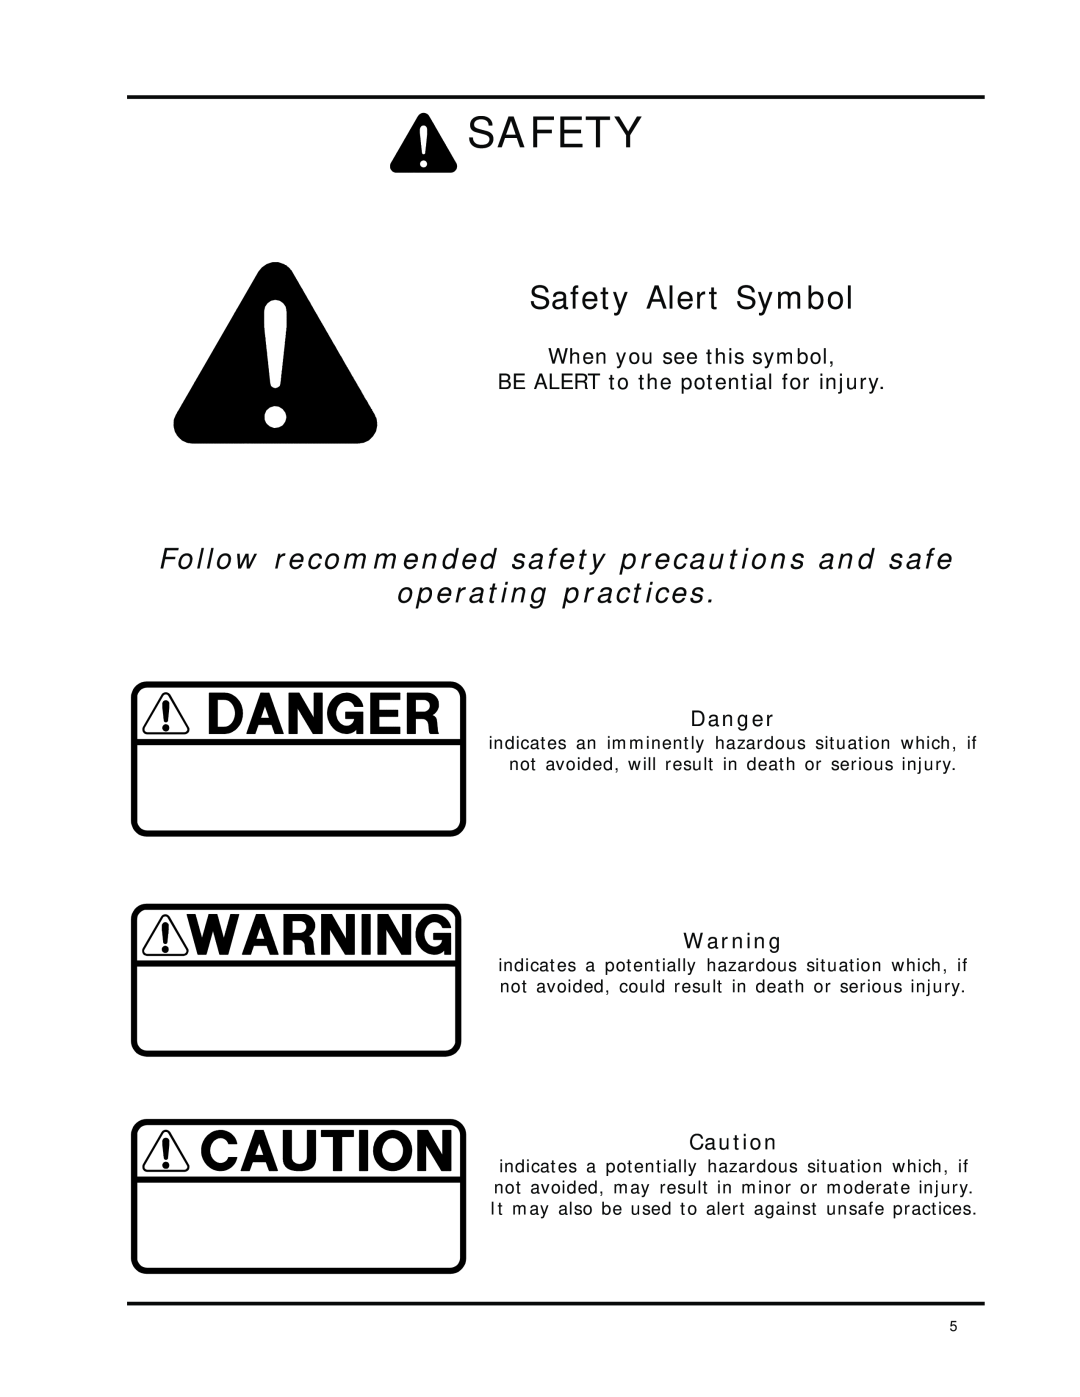 Dixon ZTR 8025 manual Safety Alert Symbol, Follow recommended safety precautions and safe, operating practices, Danger 